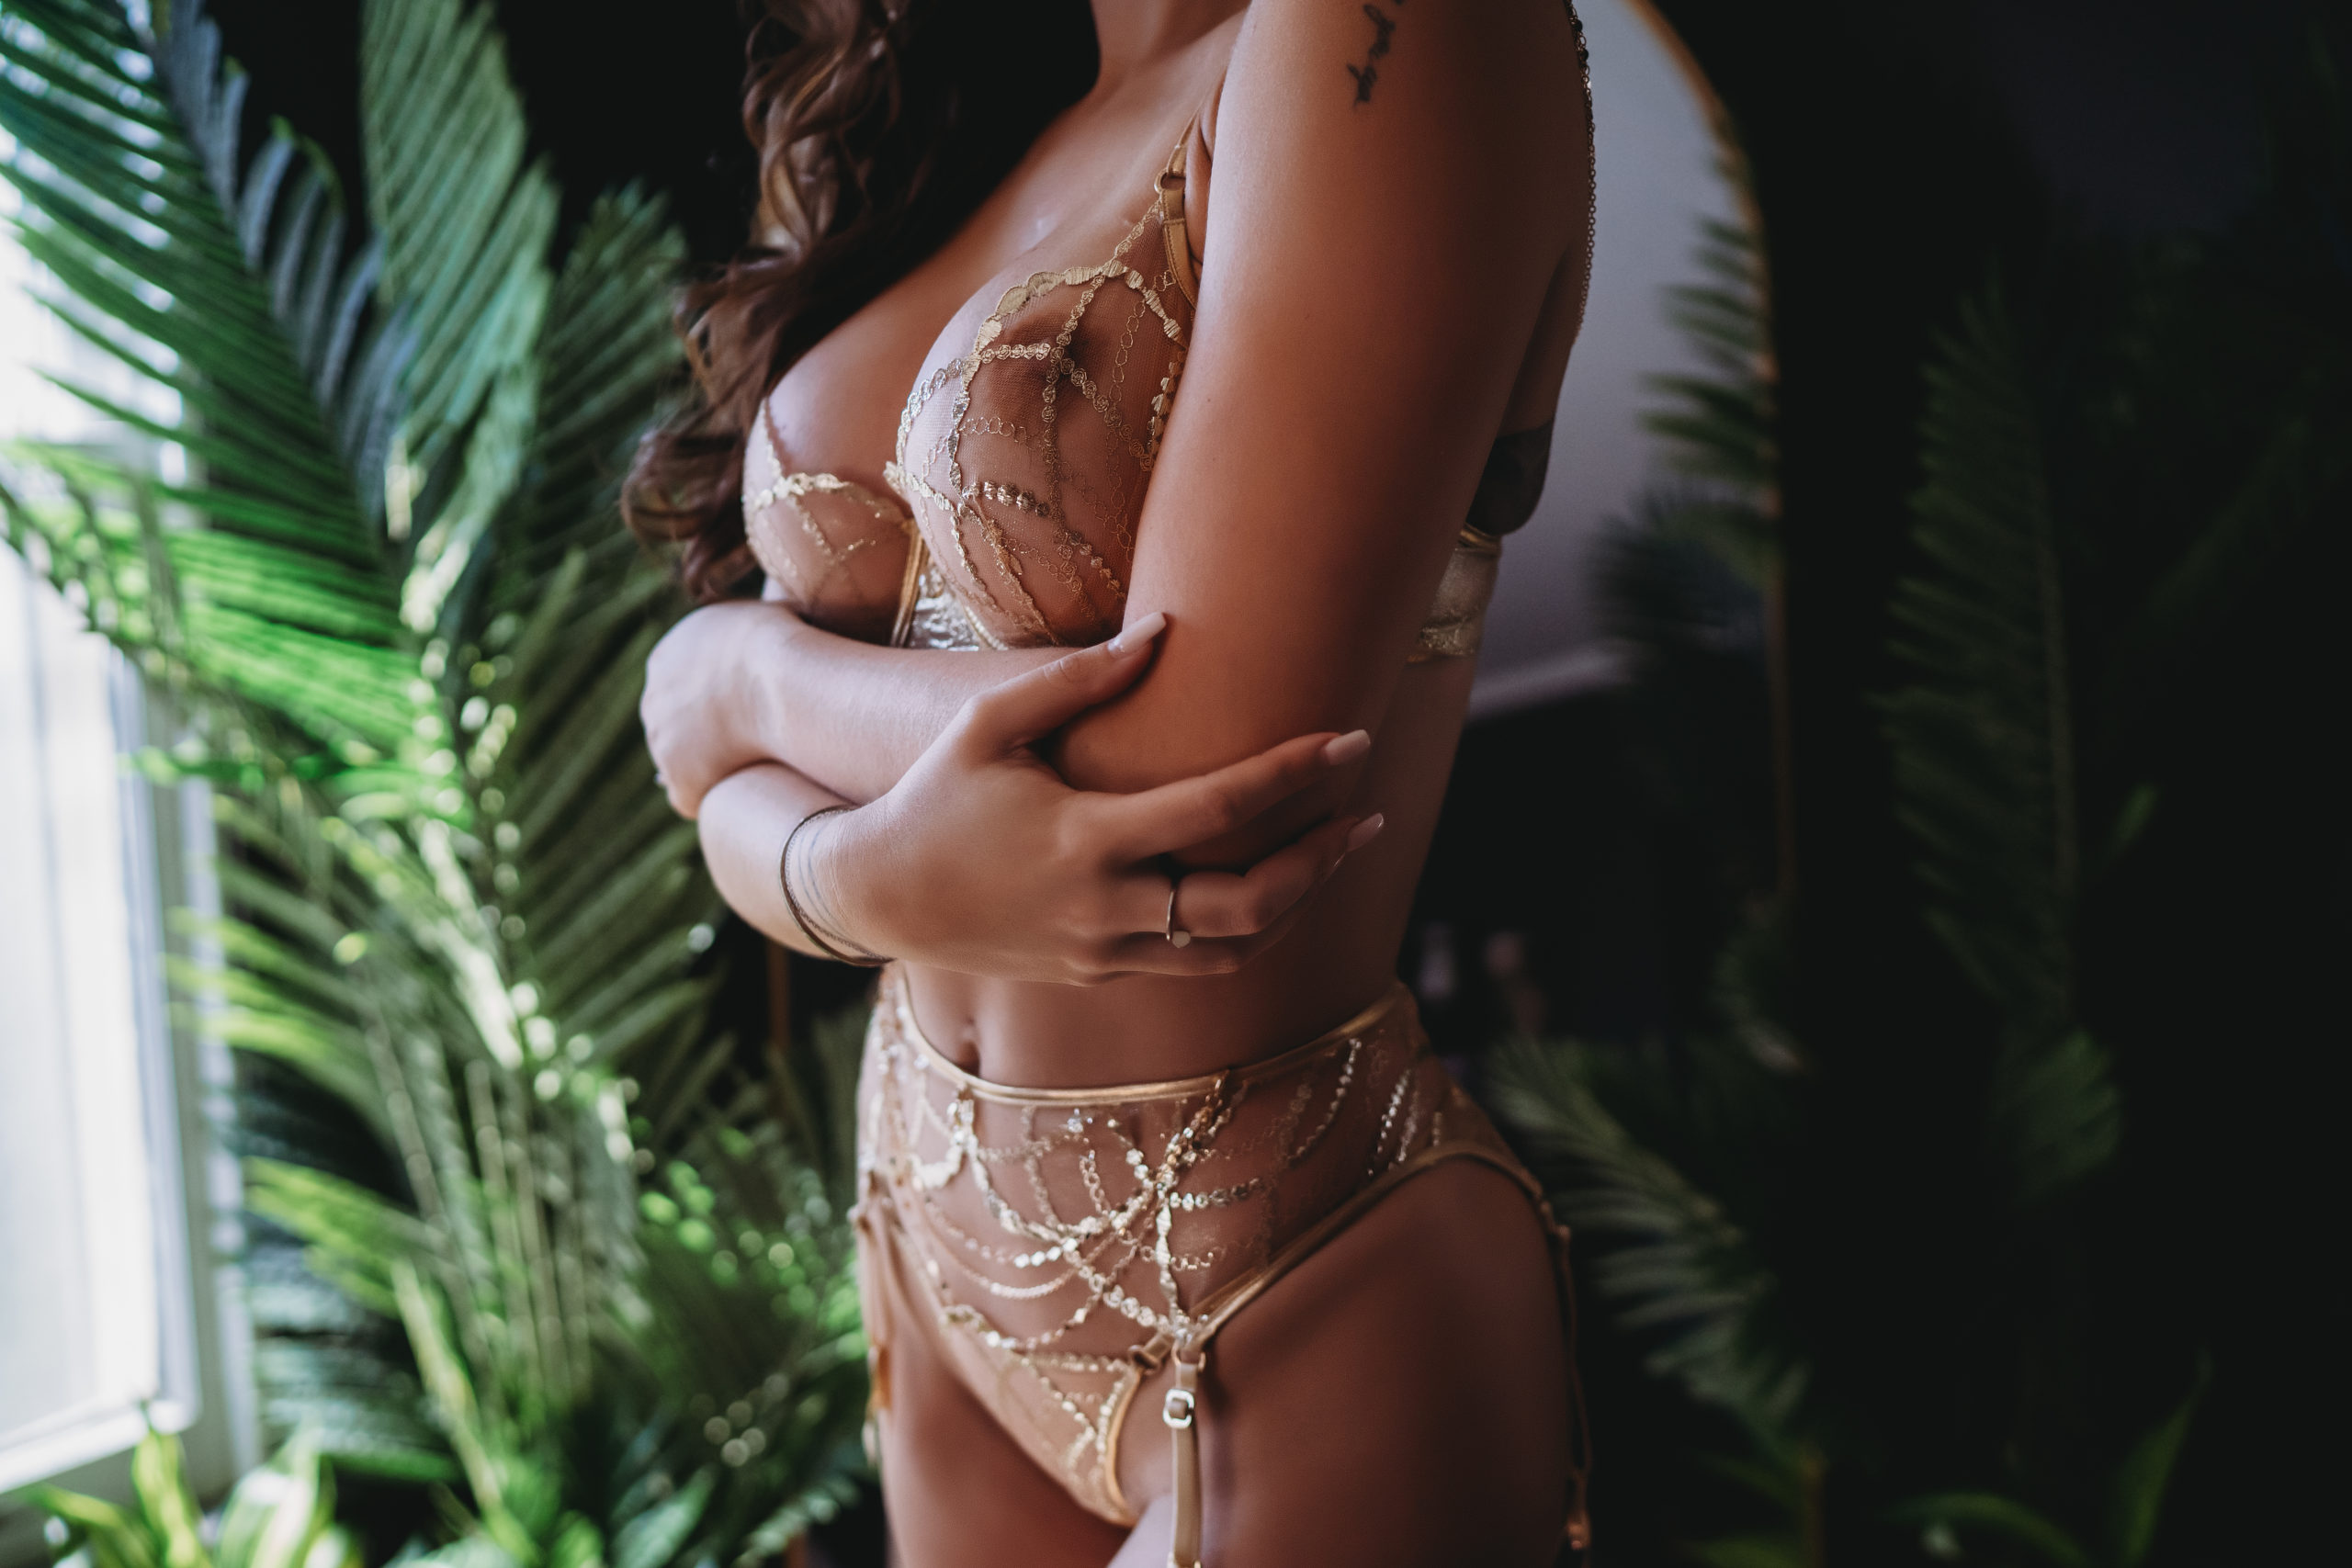 Woman with folded arms dressed in gold lingerie